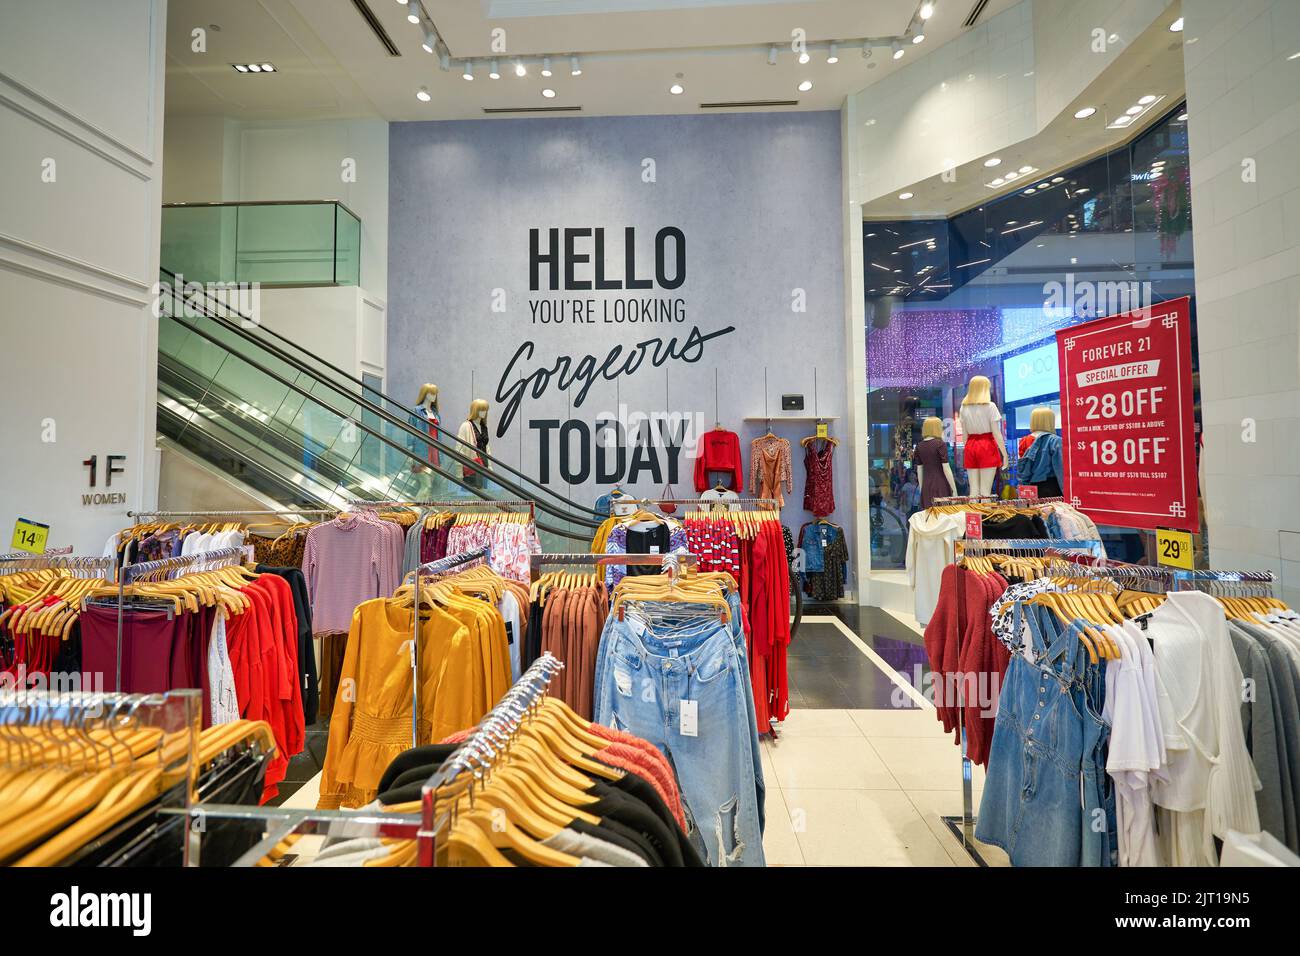 Forever 21 and H&M Clothing Stores Compared: Photos